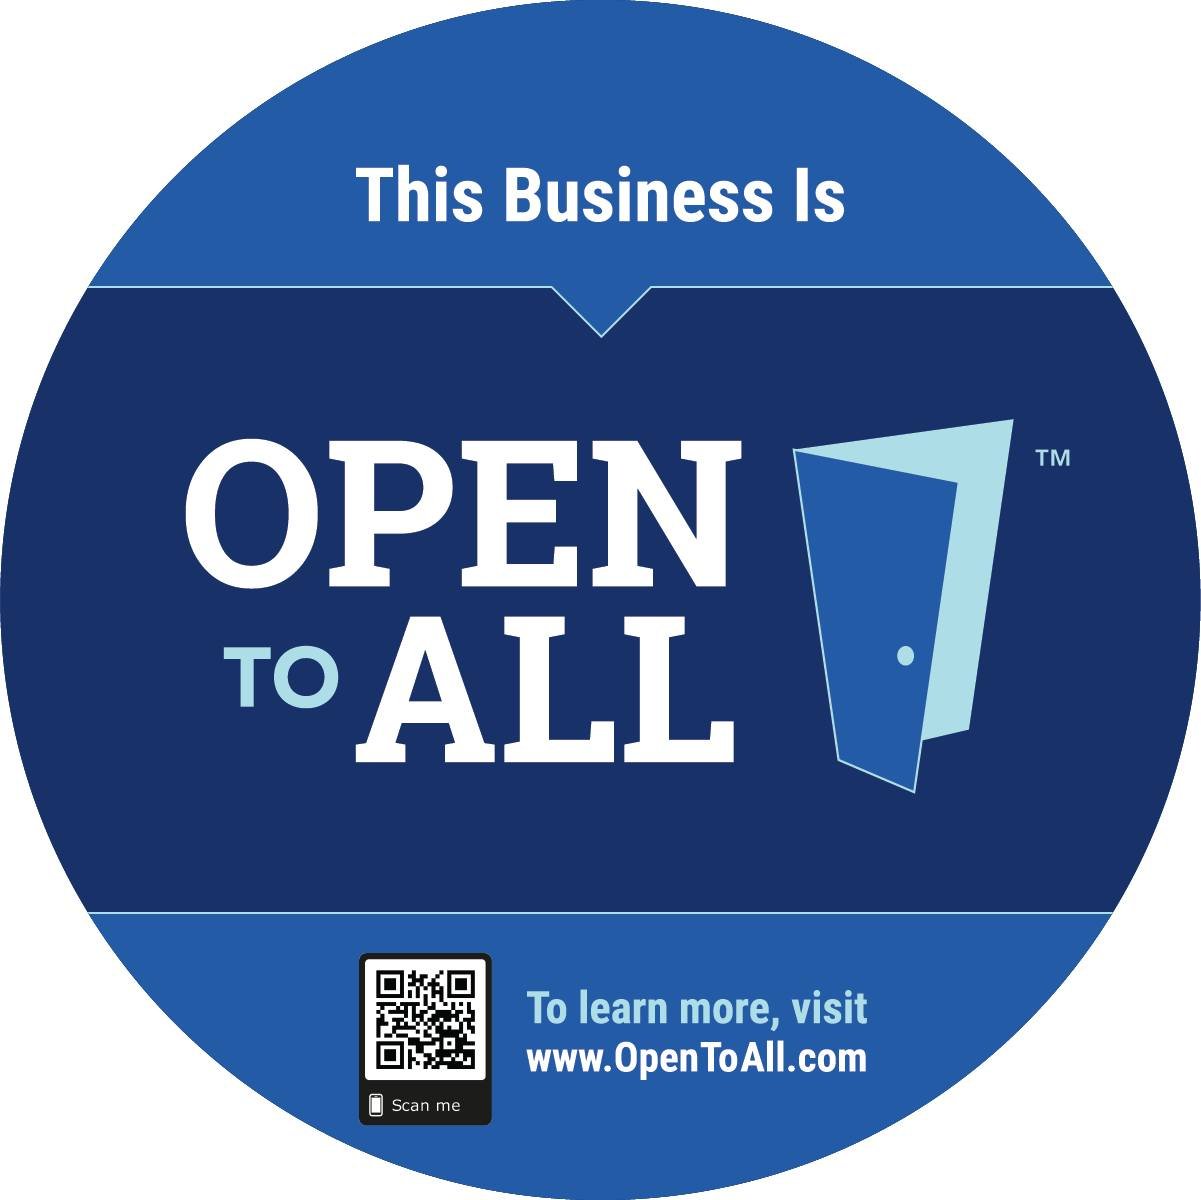 We are proud to be Open to All! 

Open to All is a national nondiscrimination campaign that believes everyone should be welcome regardless of race, ethnicity, national origin, sex, sexual orientation, gender identity and expression, immigration statu